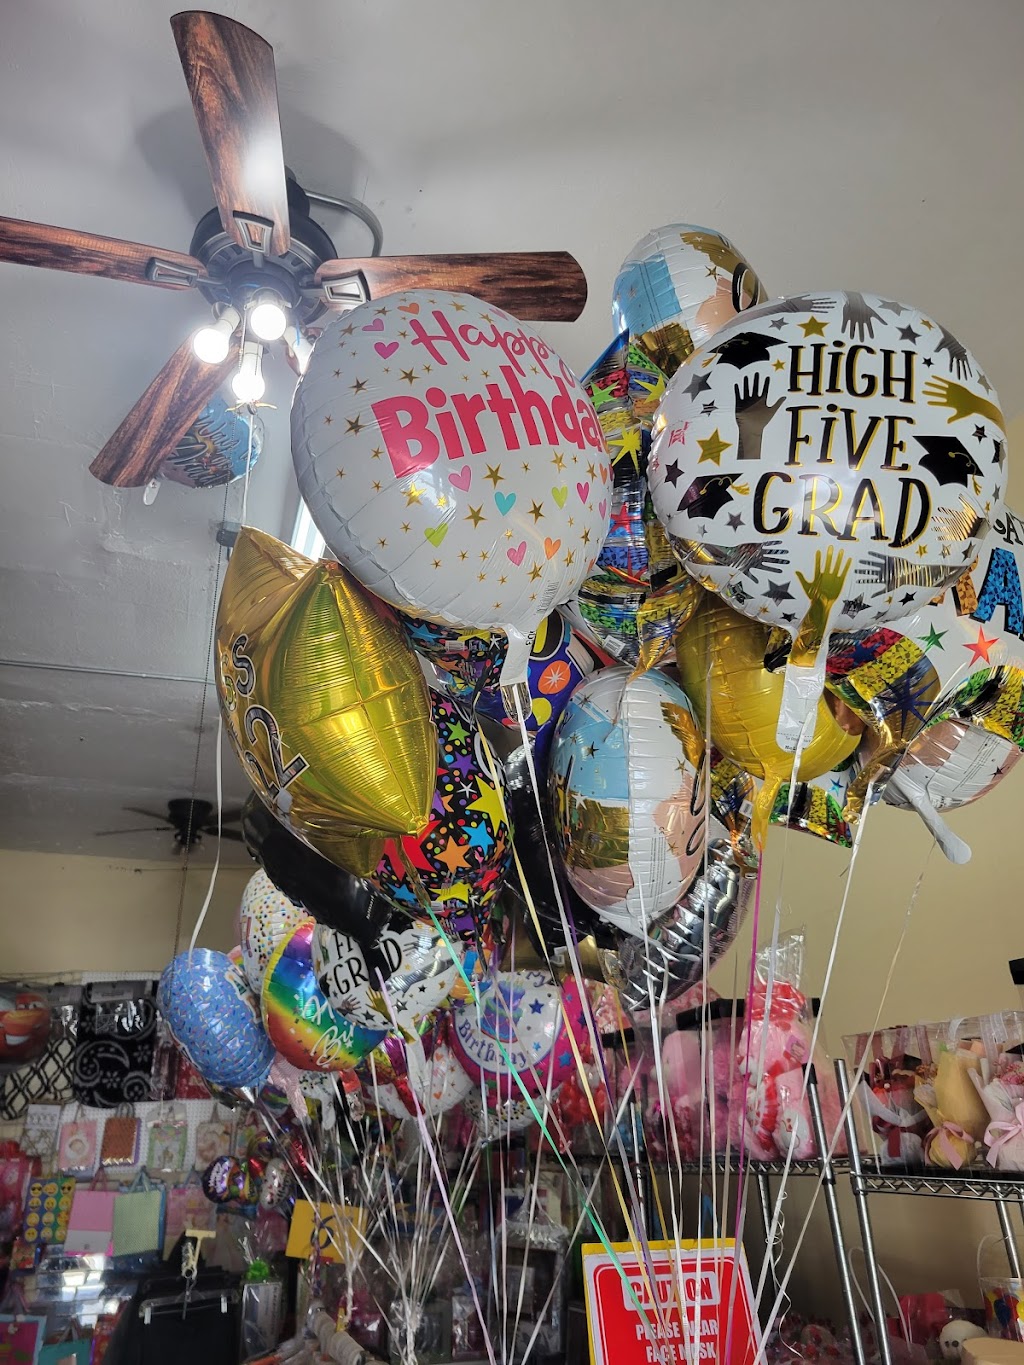 Lupitas Gift And Party Supplies | 4126 S Hoover St, Los Angeles, CA 90037 | Phone: (323) 861-0223